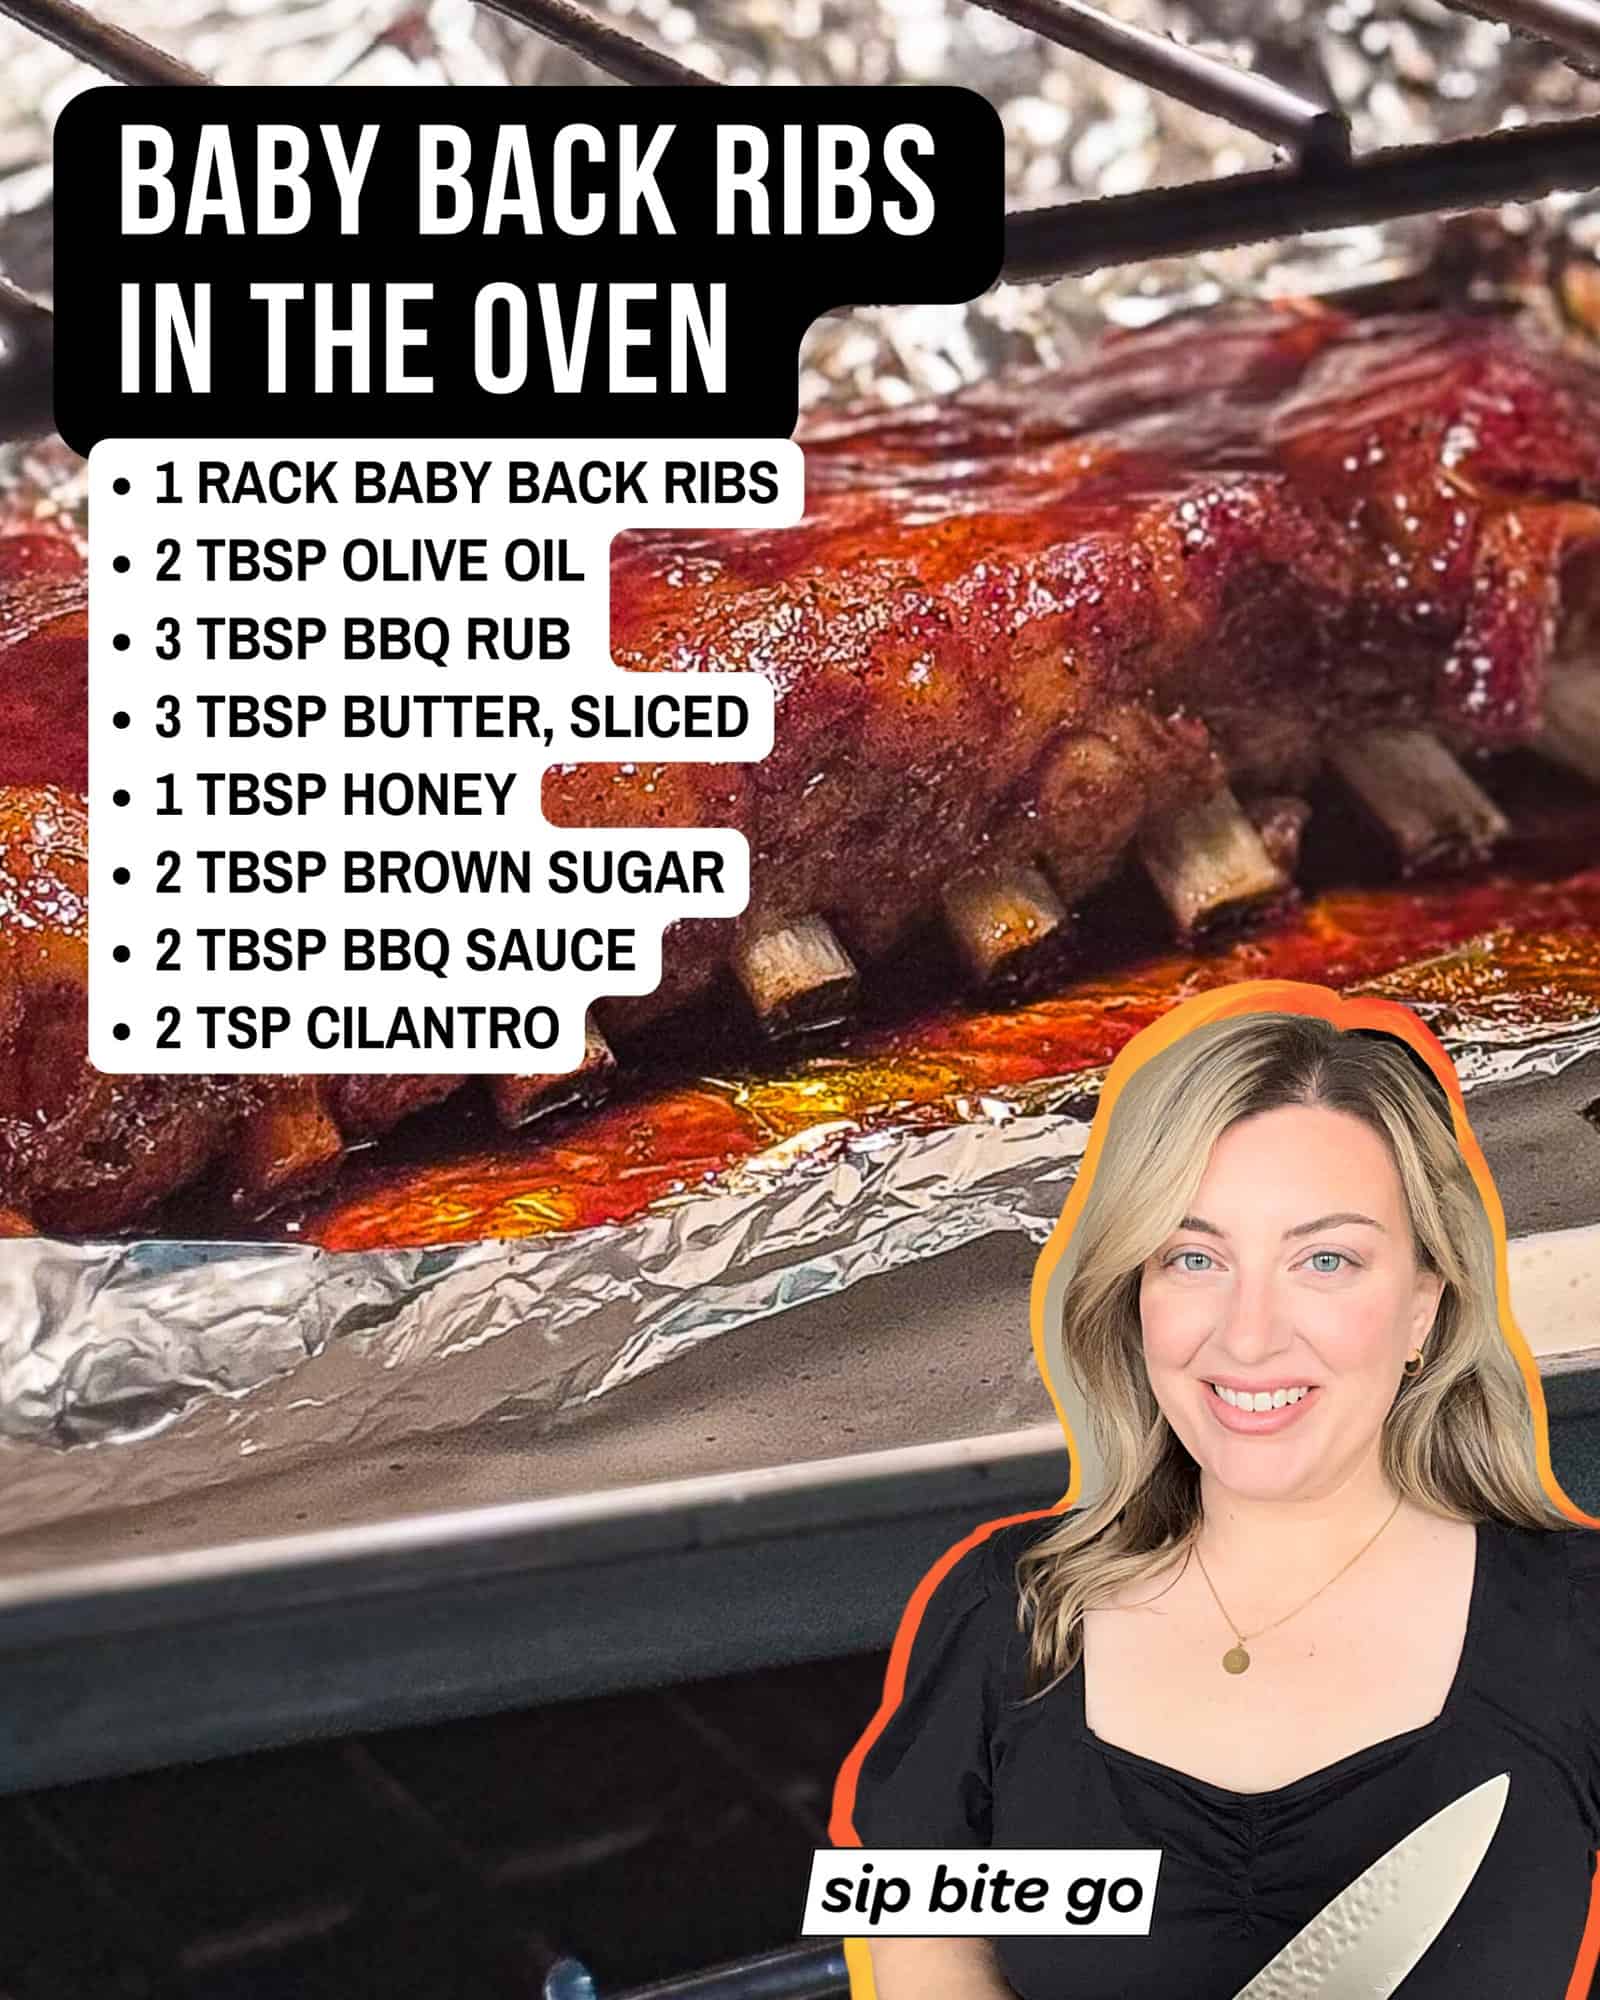 Recipe ingredients for baking baby back ribs in the oven